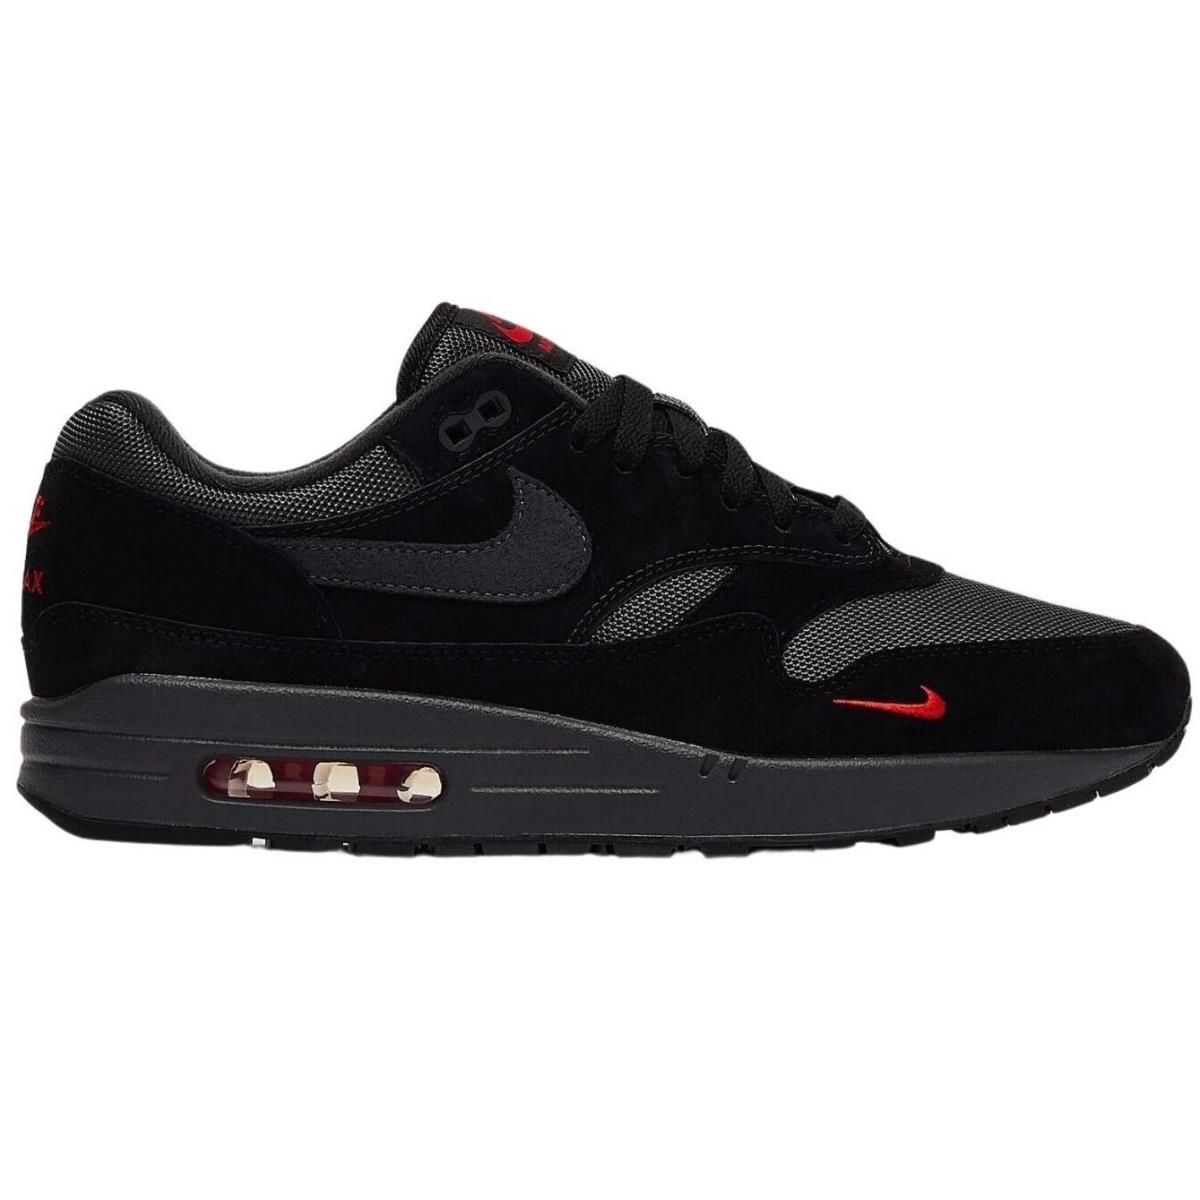 Nike Air Max 1 Men`s Casual Shoes All Colors US Sizes 7-14 Black / Anthracite / University Red